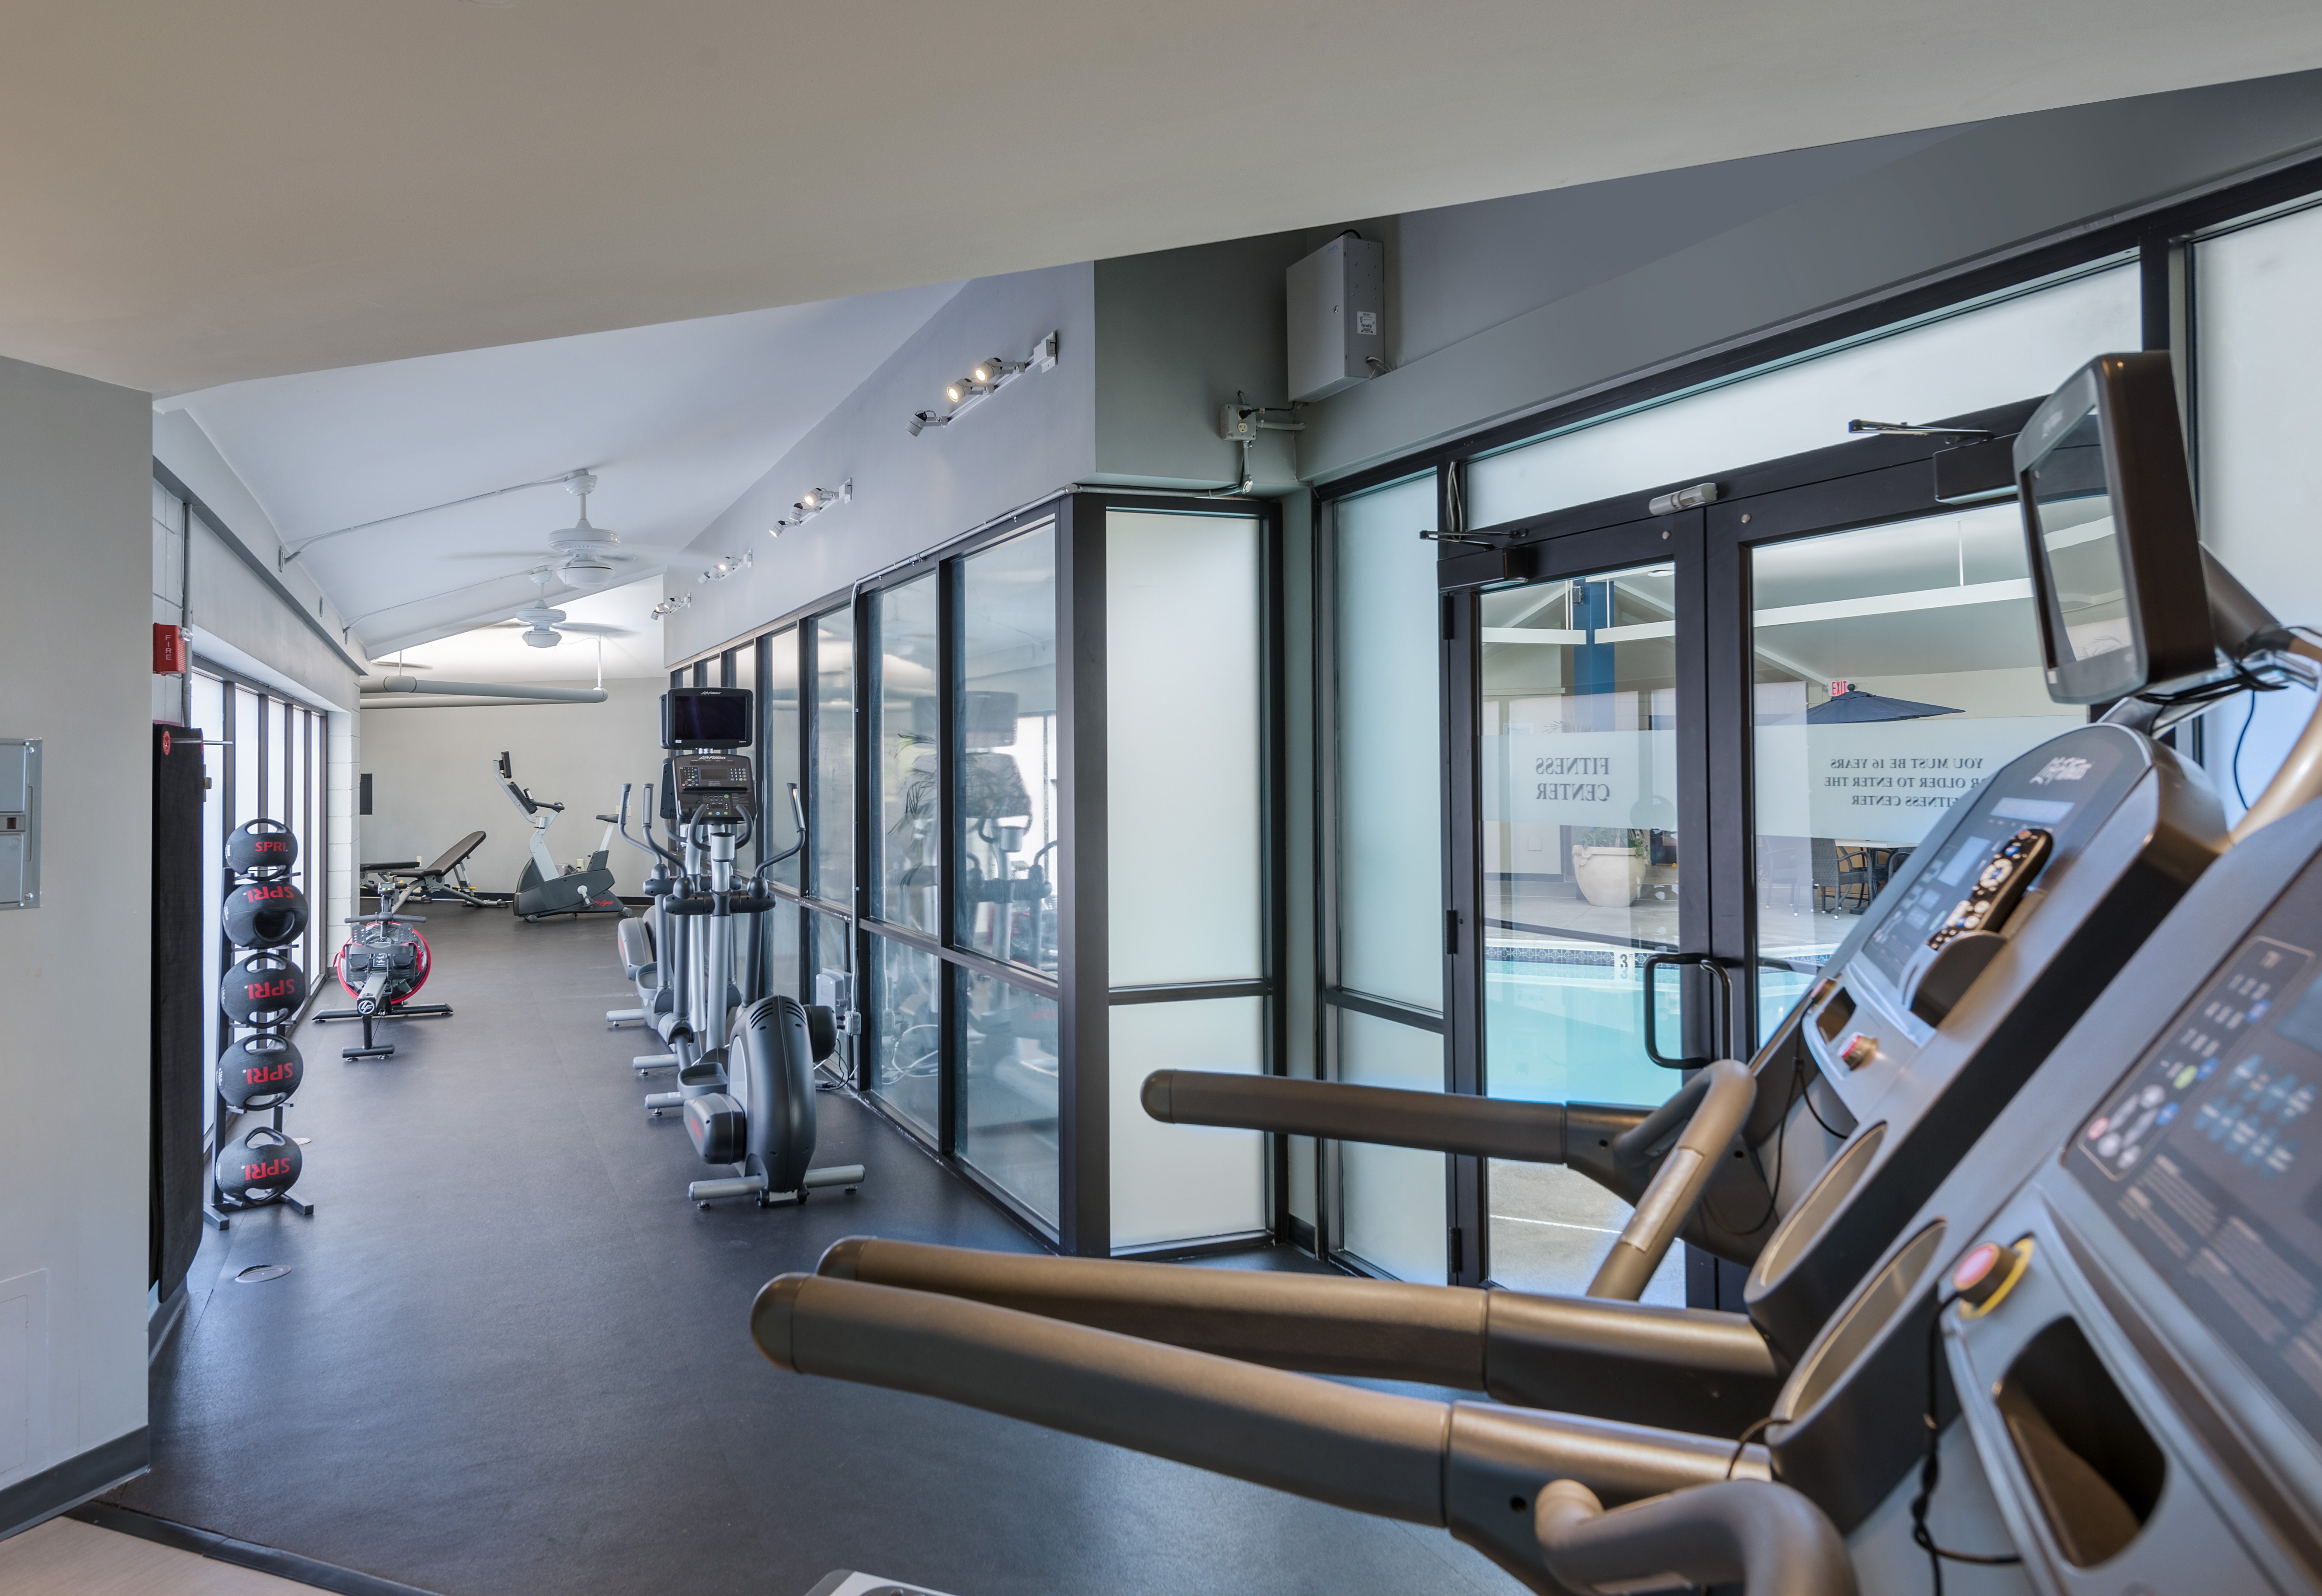 Get your workout done with our on-site fitness center.